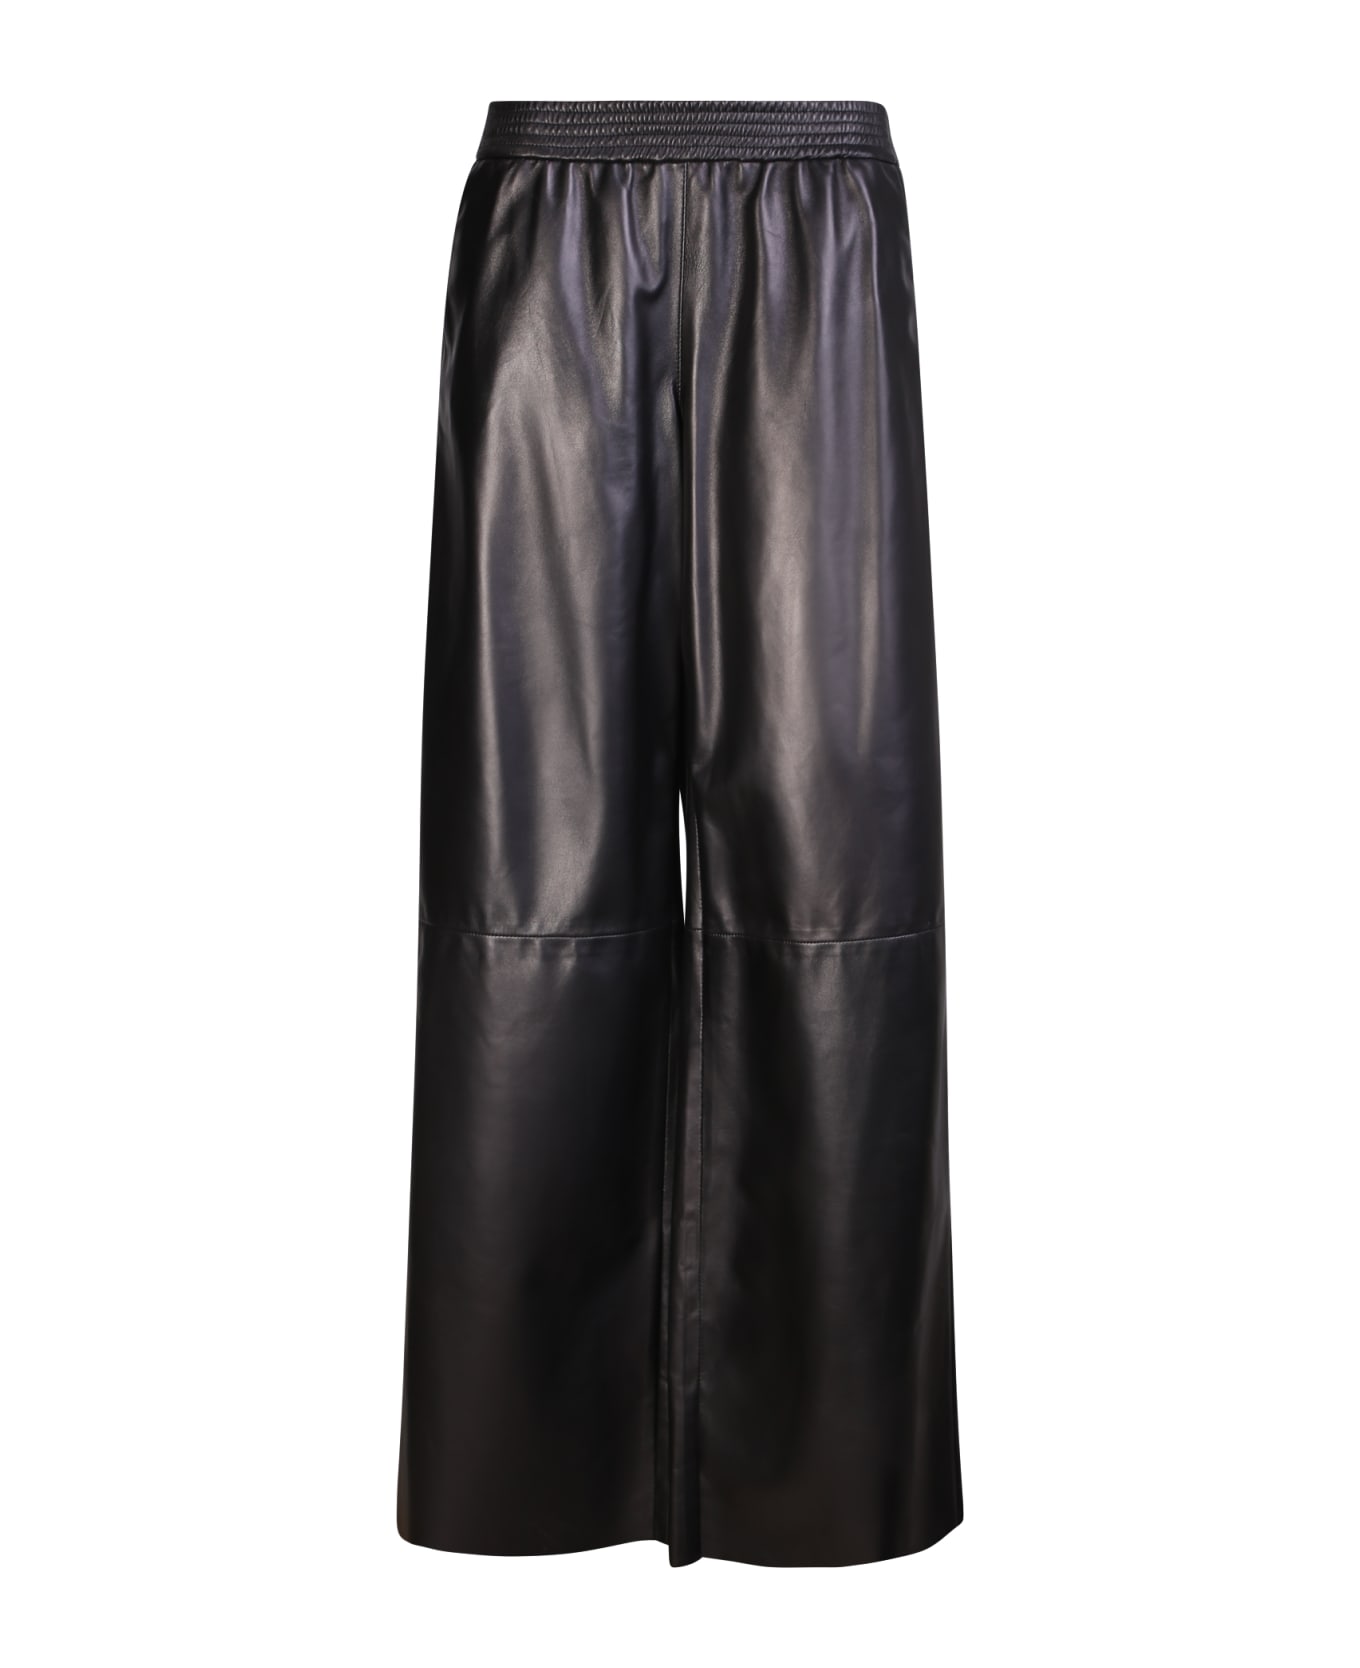 DROMe Black Leather Trousers - Black ボトムス